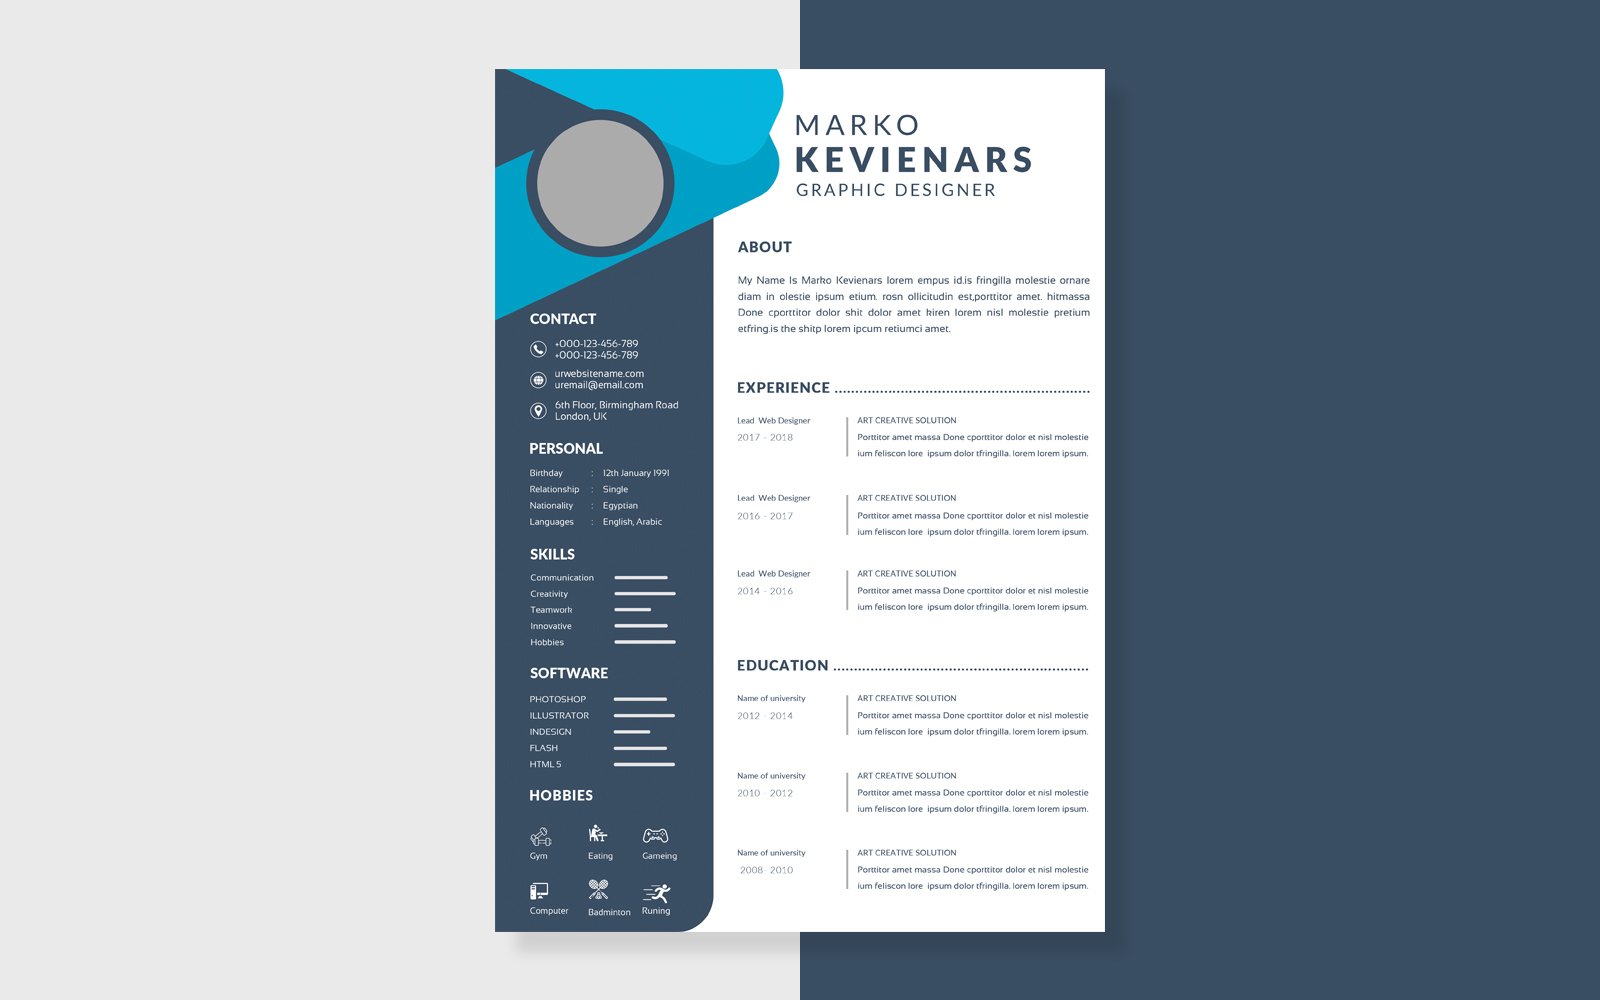 Resume Layout with Sidebar and Blur Shape